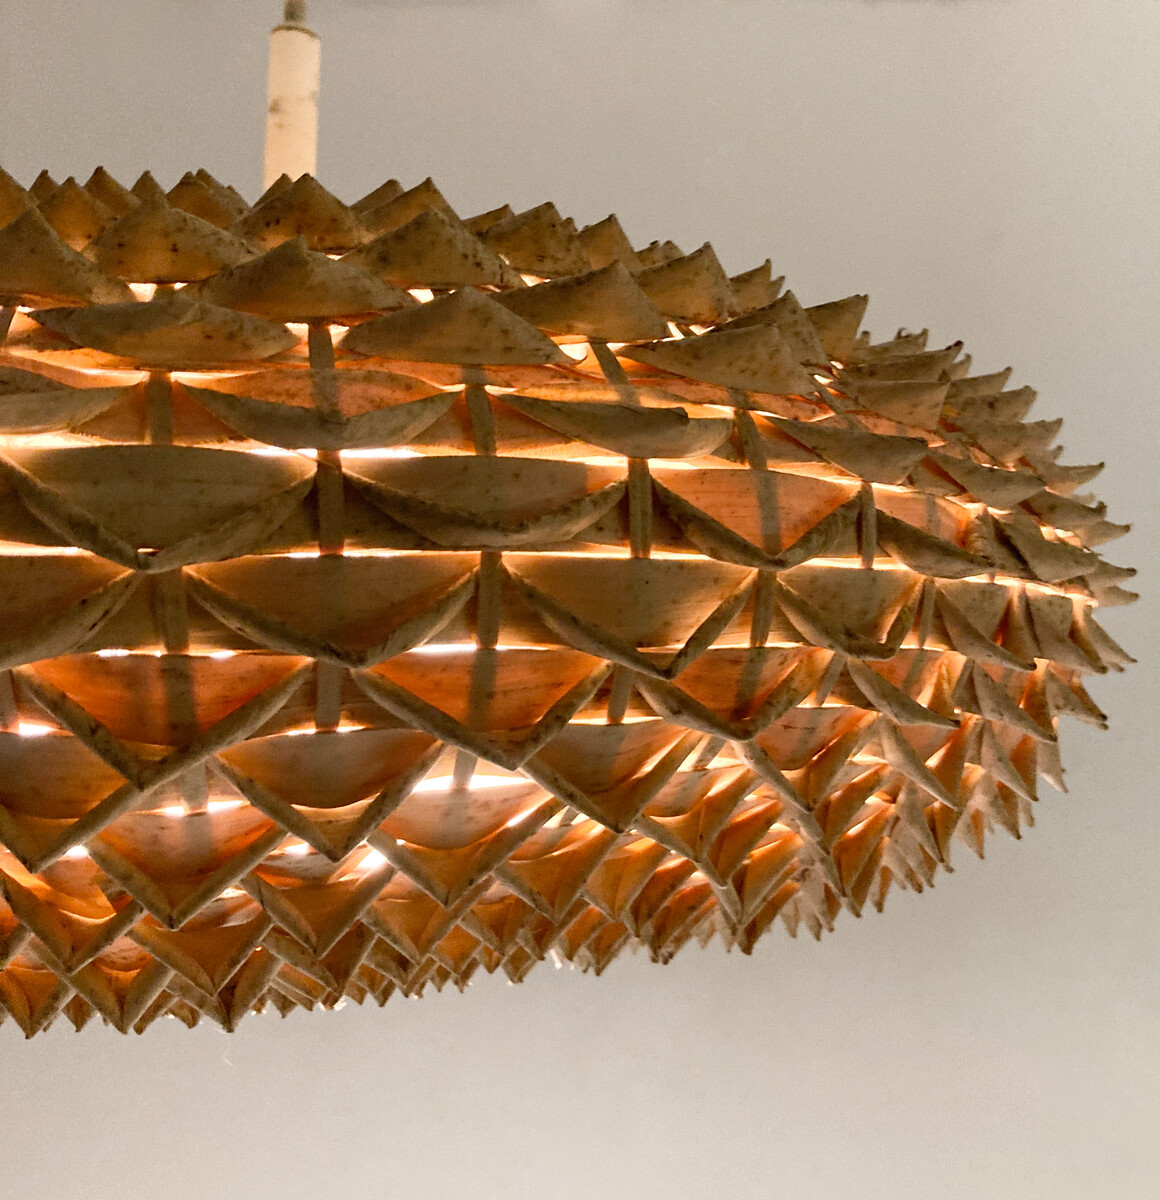 Ceiling Light by Wiebke Braasch, 2010s - 2 Available